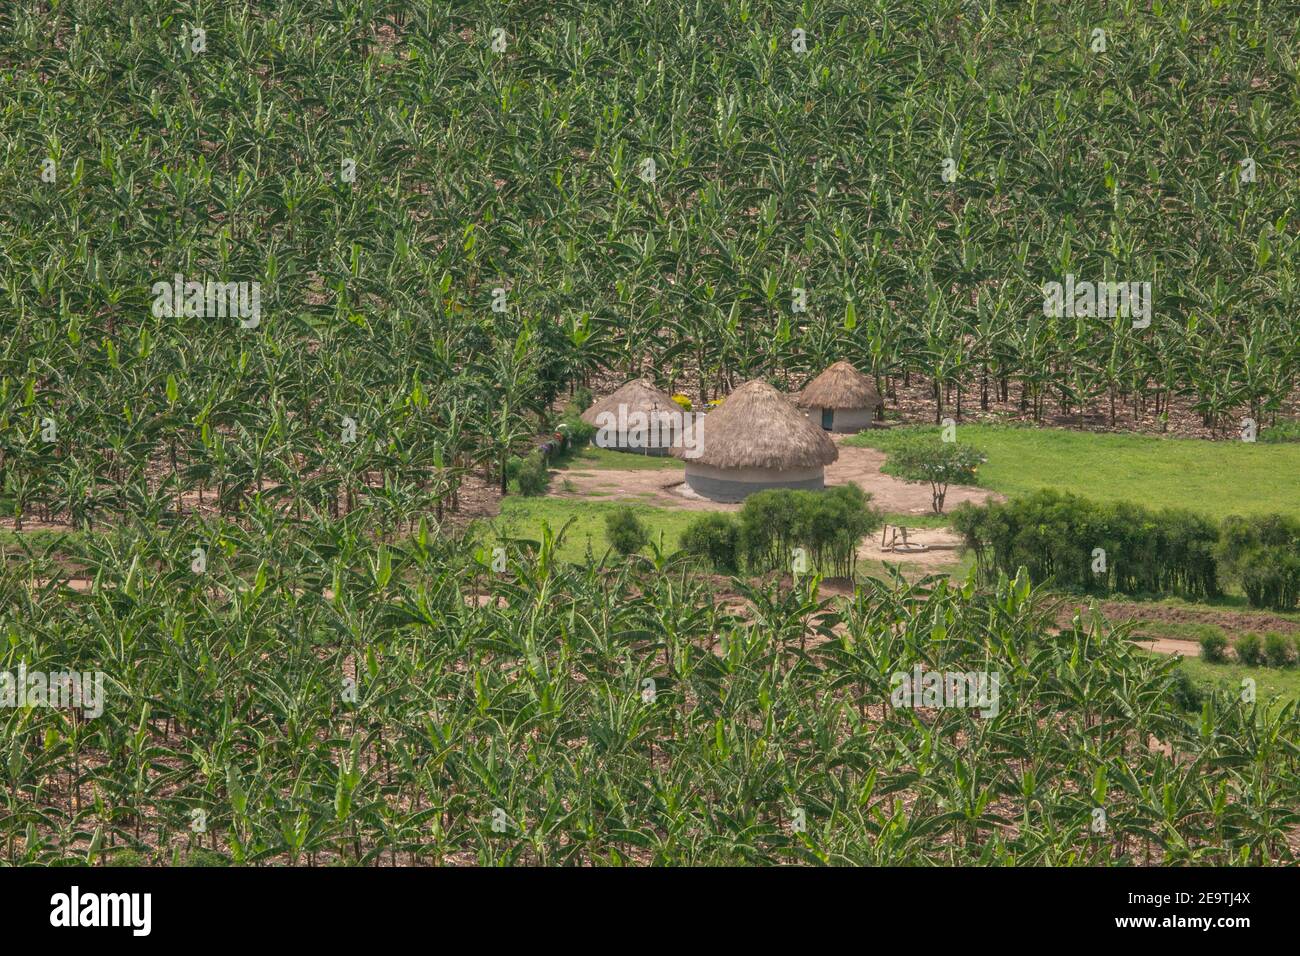 Small African Village surrounded by banana trees in Uganda, East Africa Stock Photo